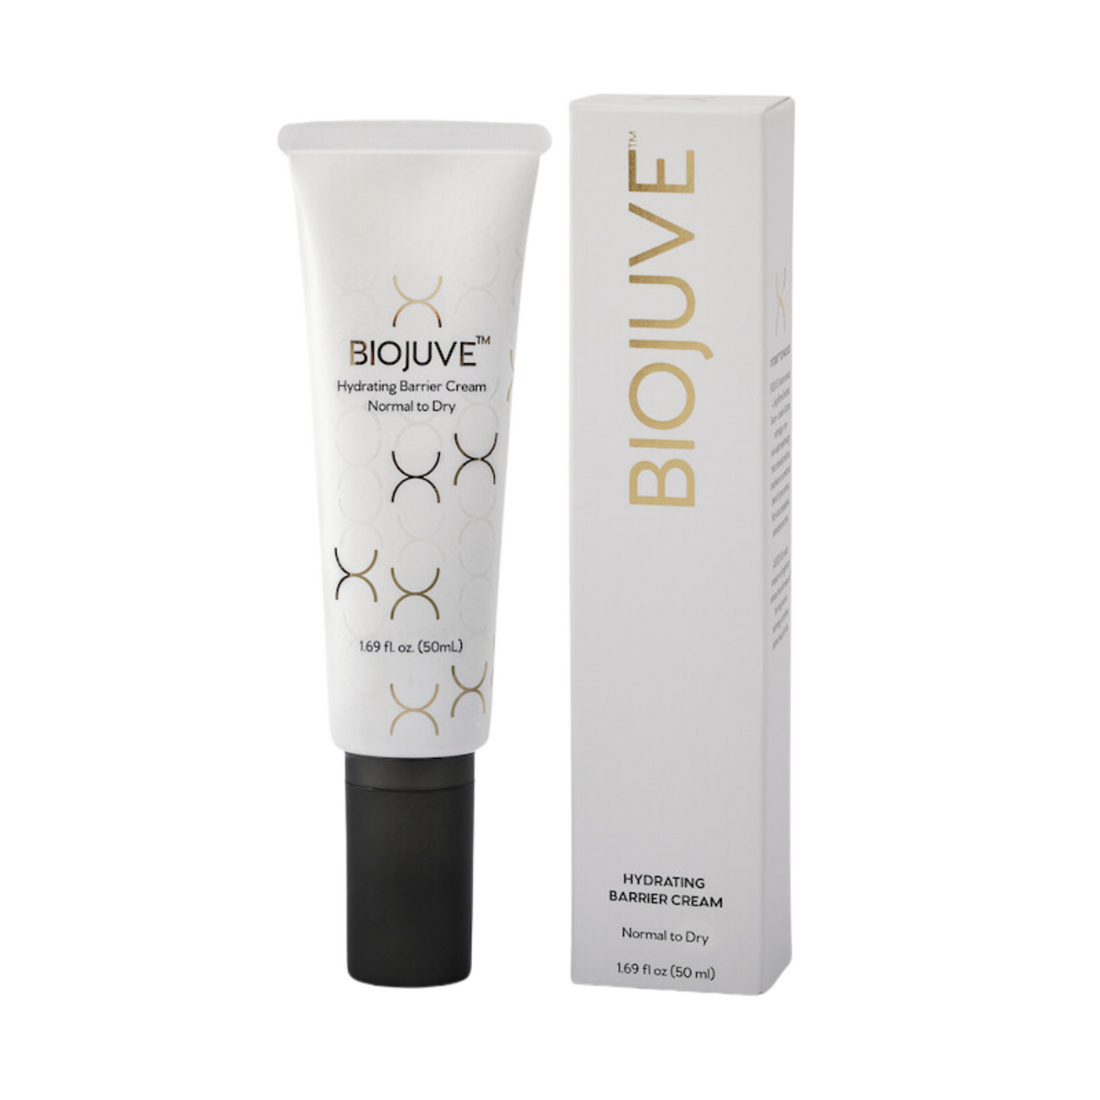 Biojuve Hydrating Barrier Cream Normal to Dry